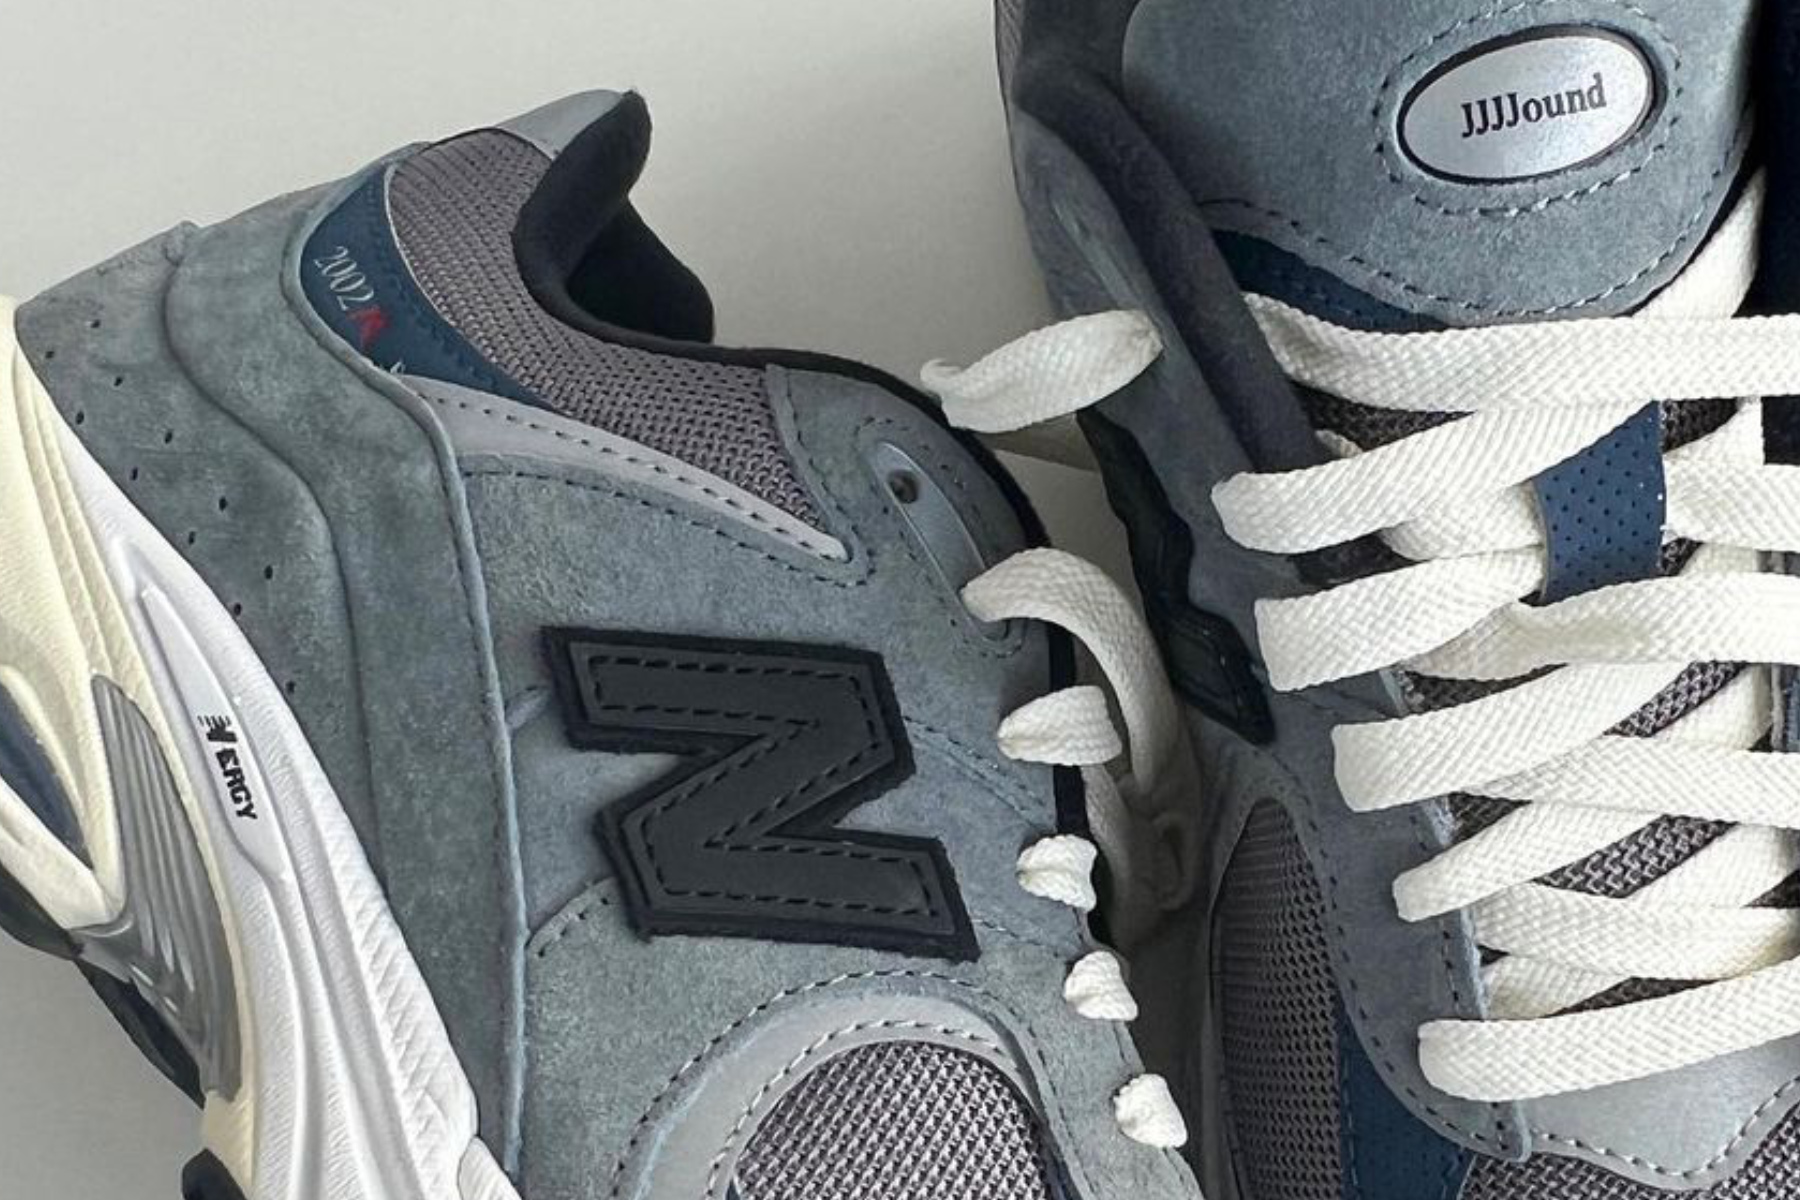 JJJJound's latest New Balance collaboration is a take on the 2002R silhouette.